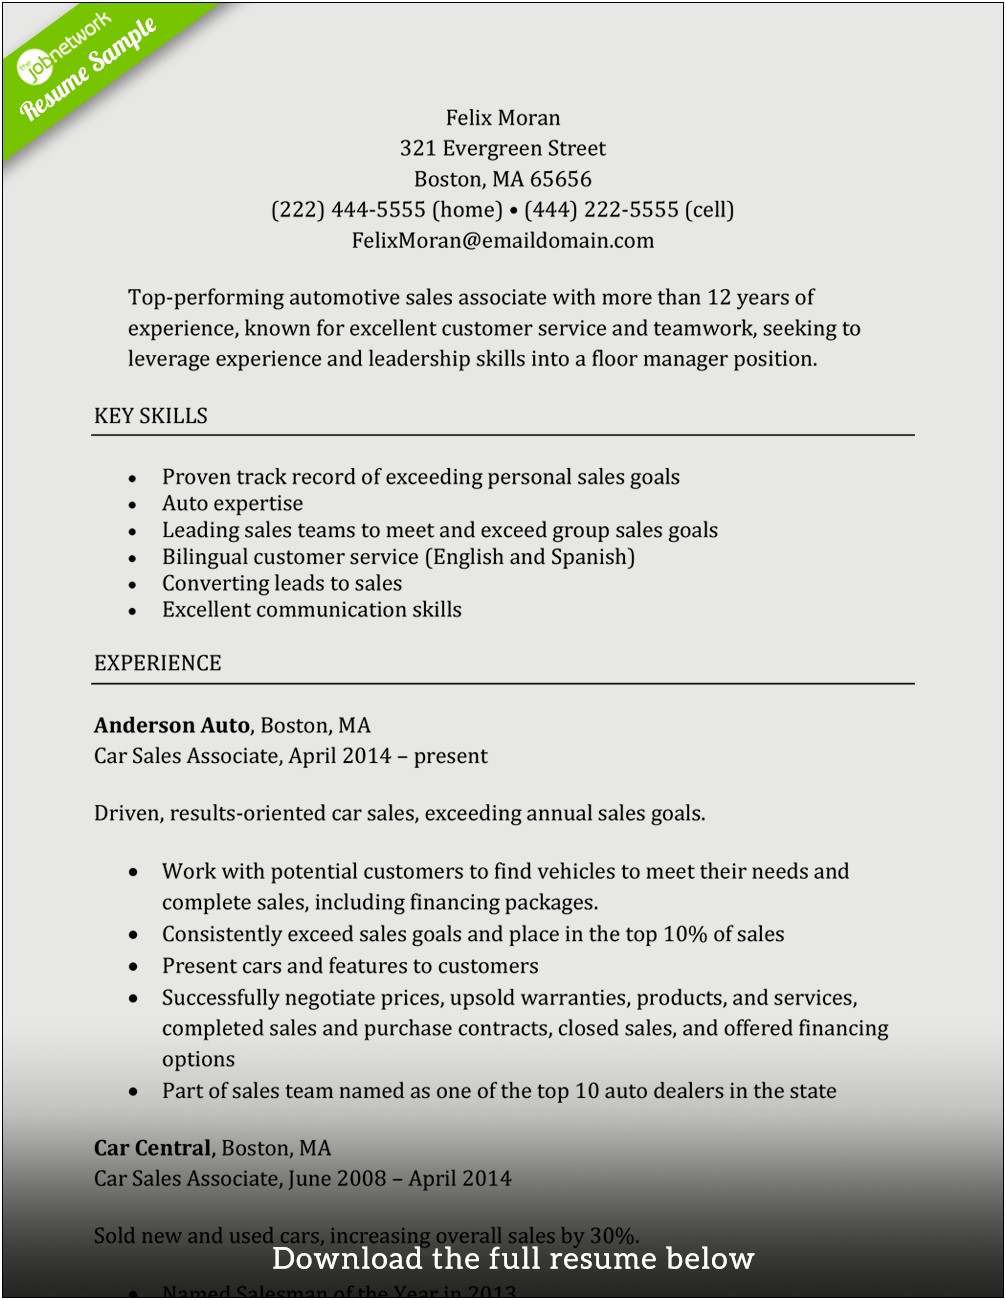 Objectives In Retail Job Resume